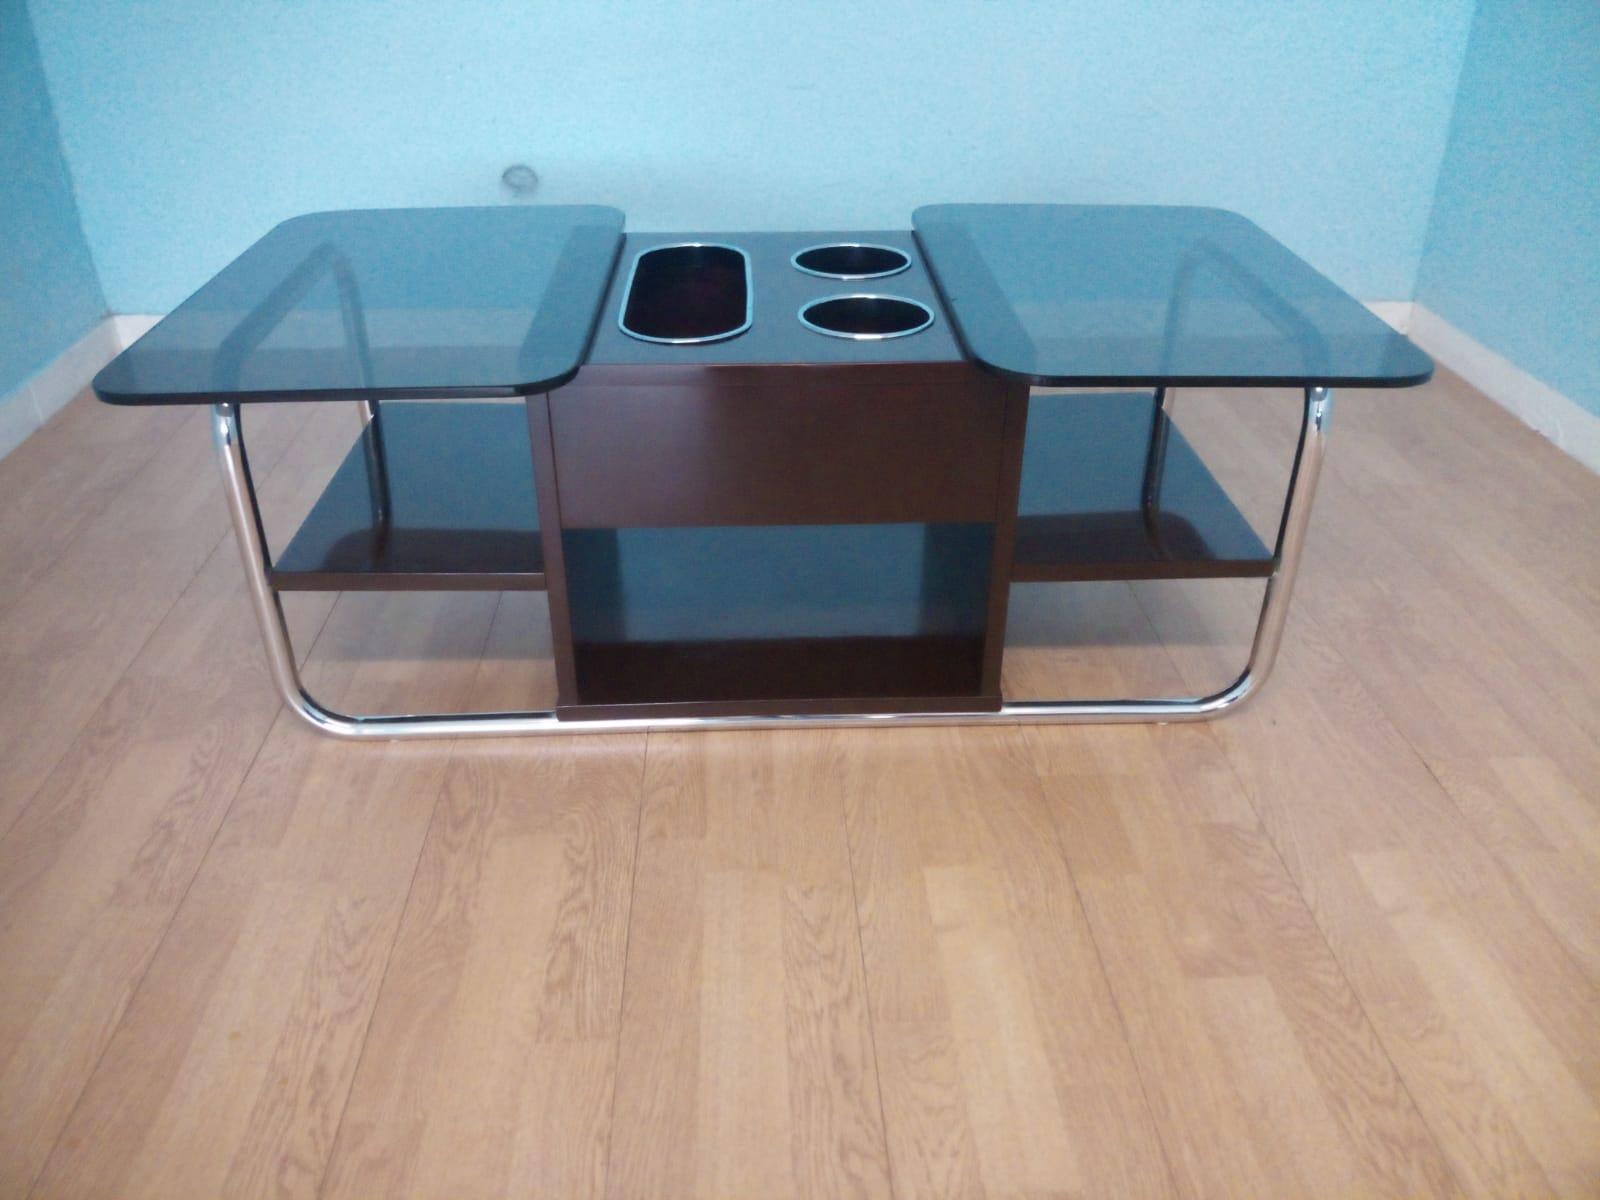 Chrome & Smoked Glass Coffee Table, 1970s Bar Table Design Vintage Industrial In Excellent Condition For Sale In Sant'Arsenio, Campania